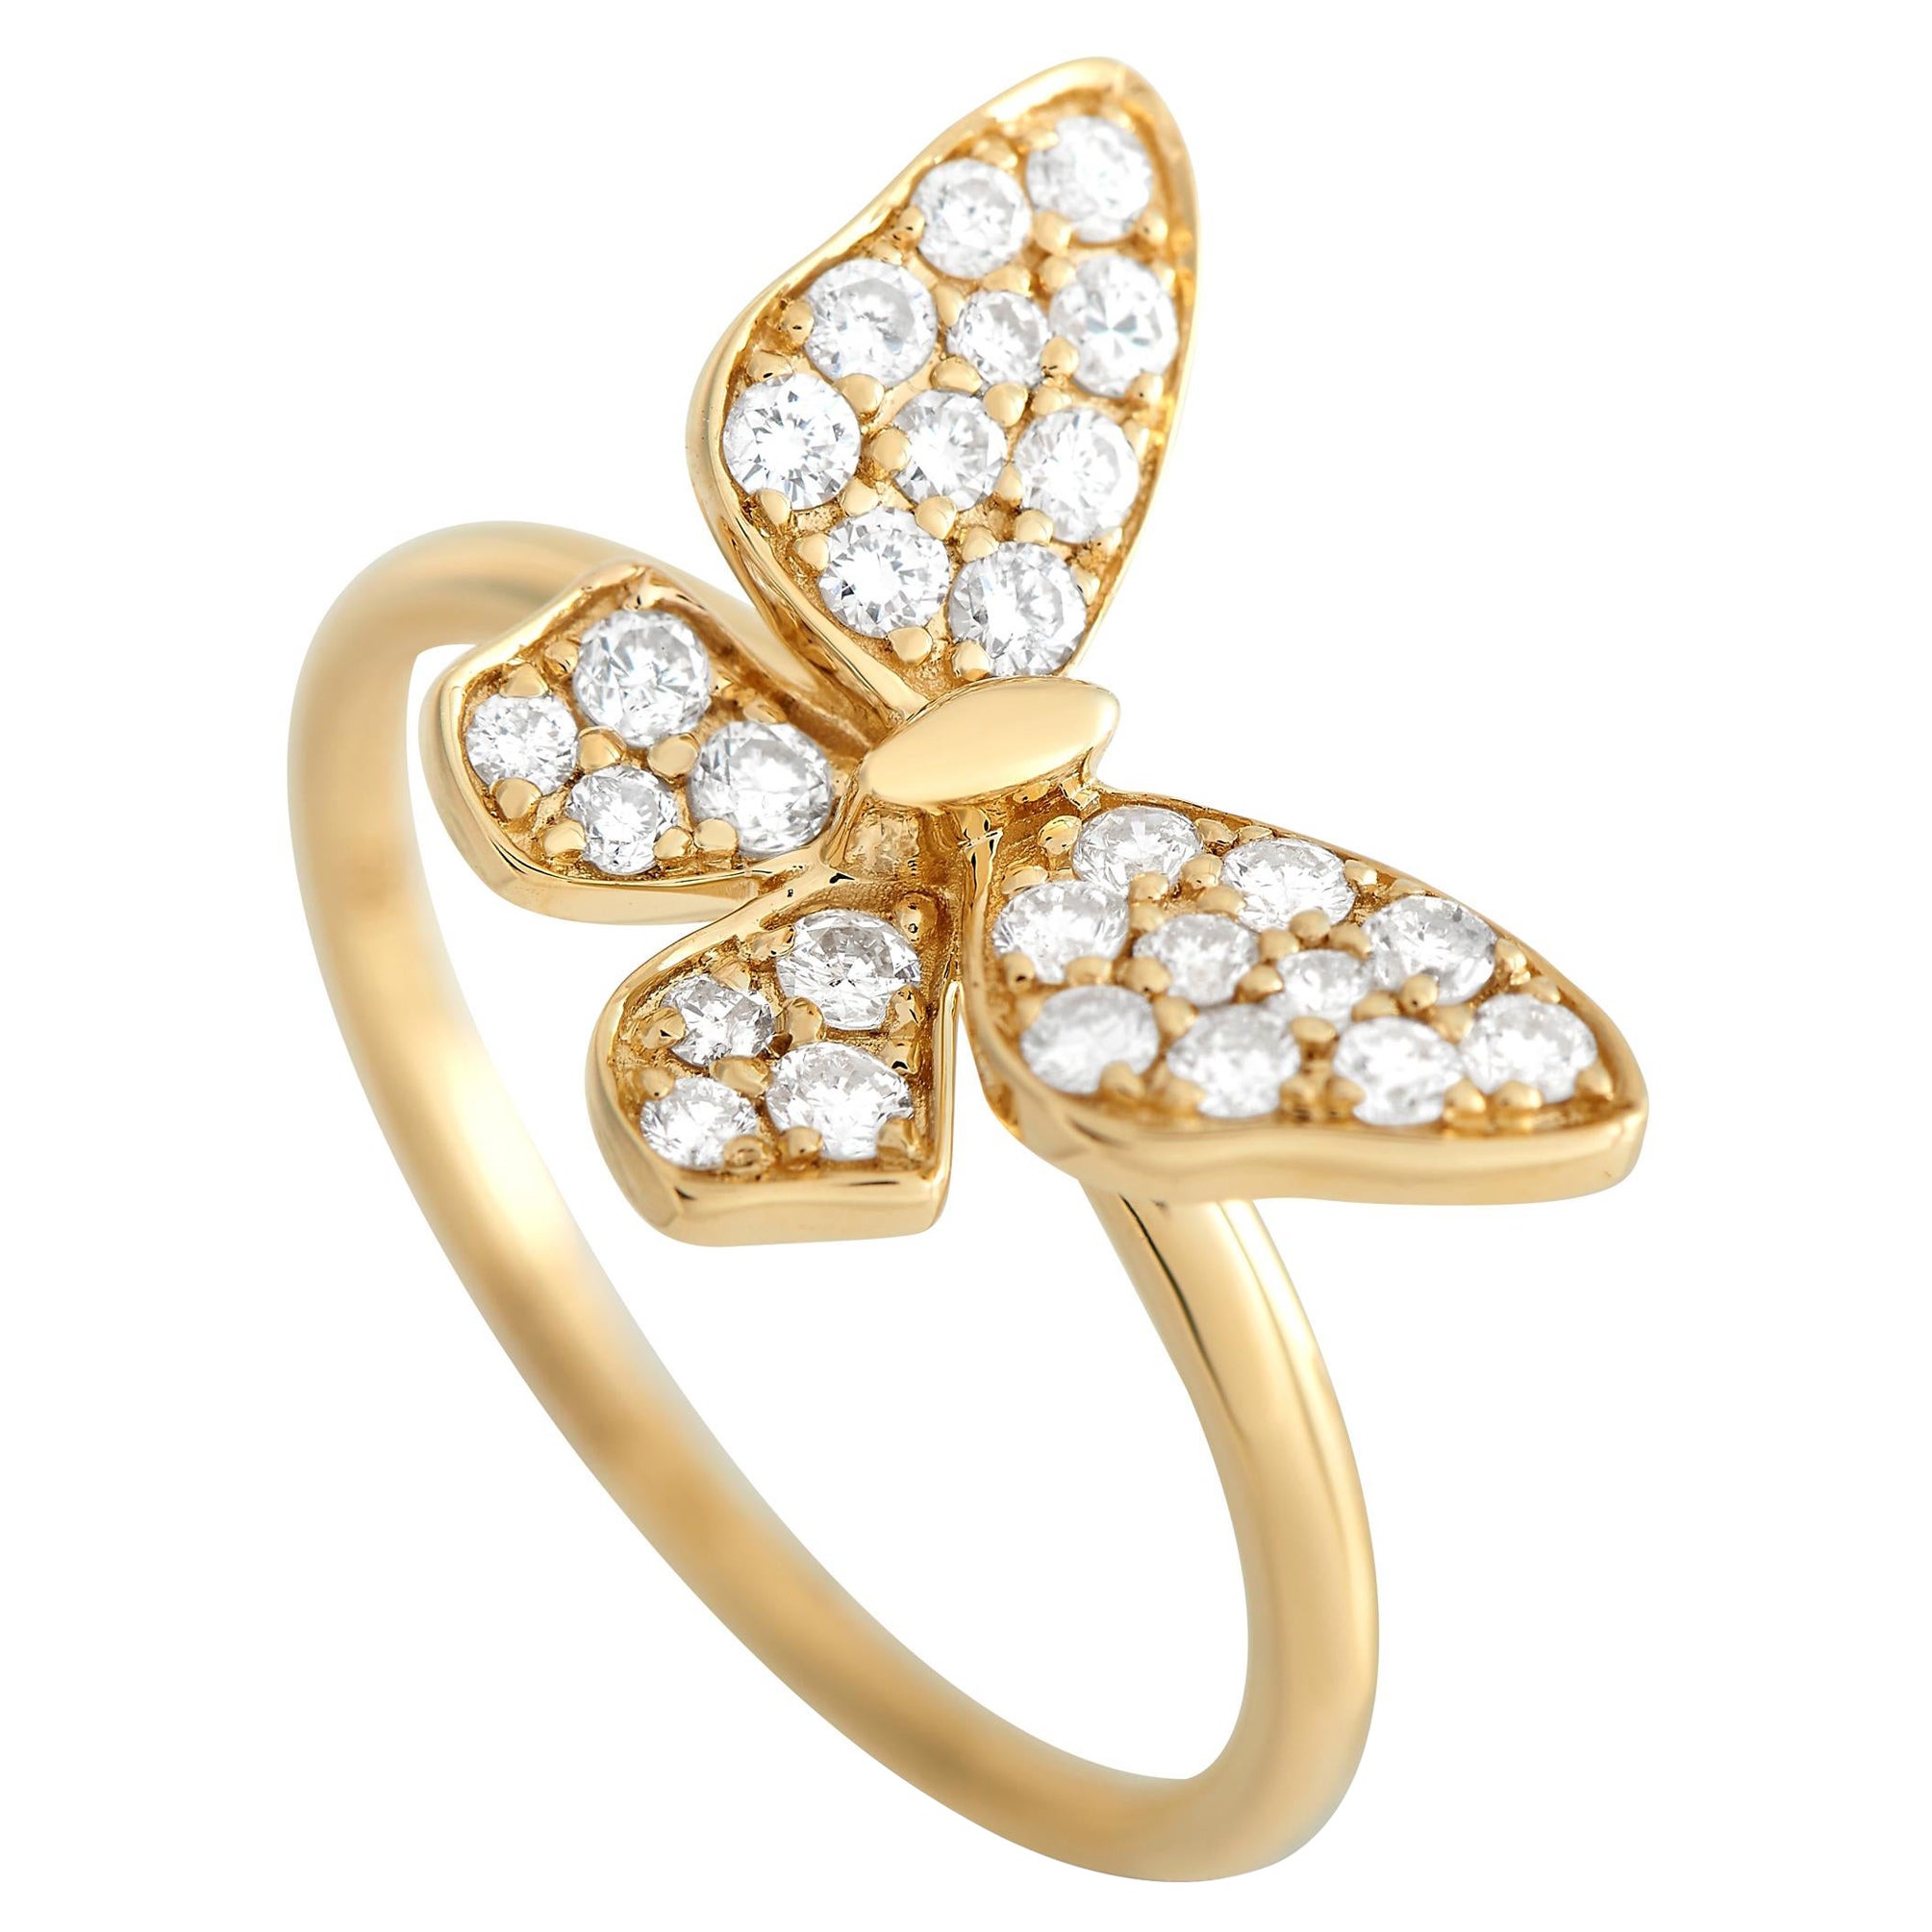 LB Exclusive 18k Yellow Gold 0.46 Carat Diamond Butterfly Ring